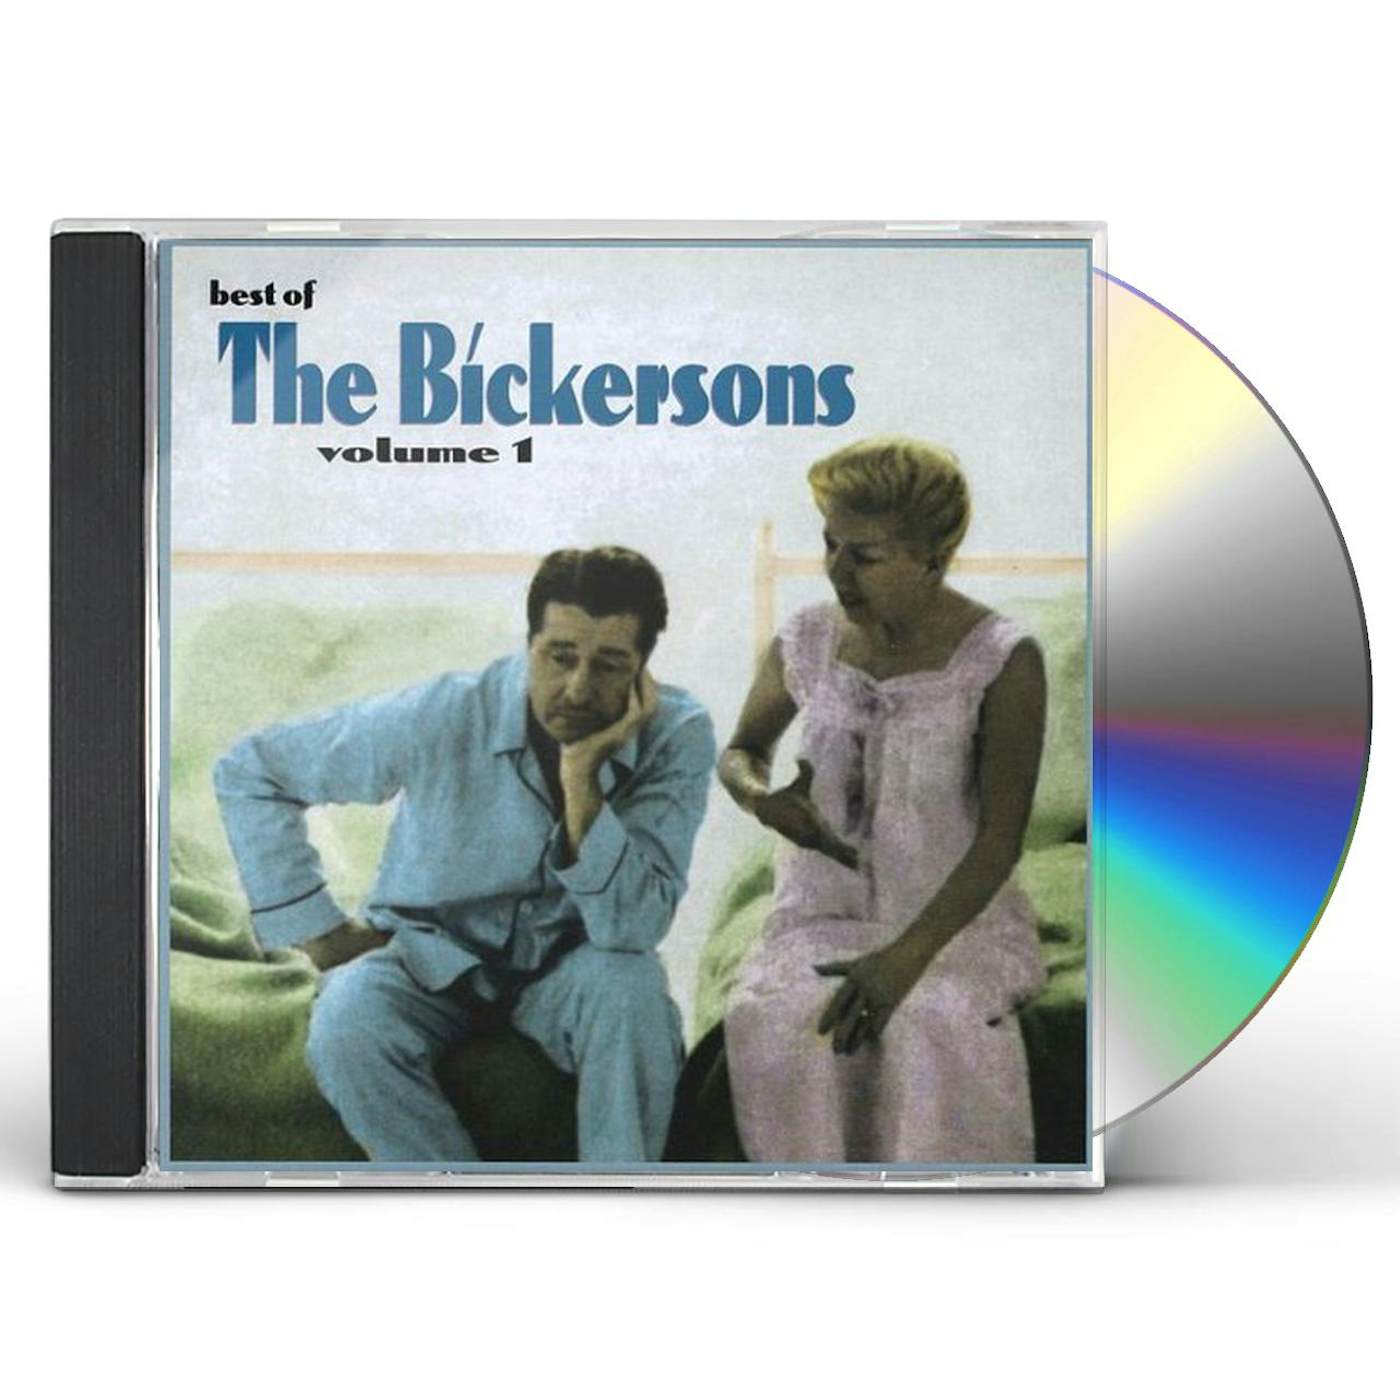 BEST OF THE BICKERSONS 1 CD